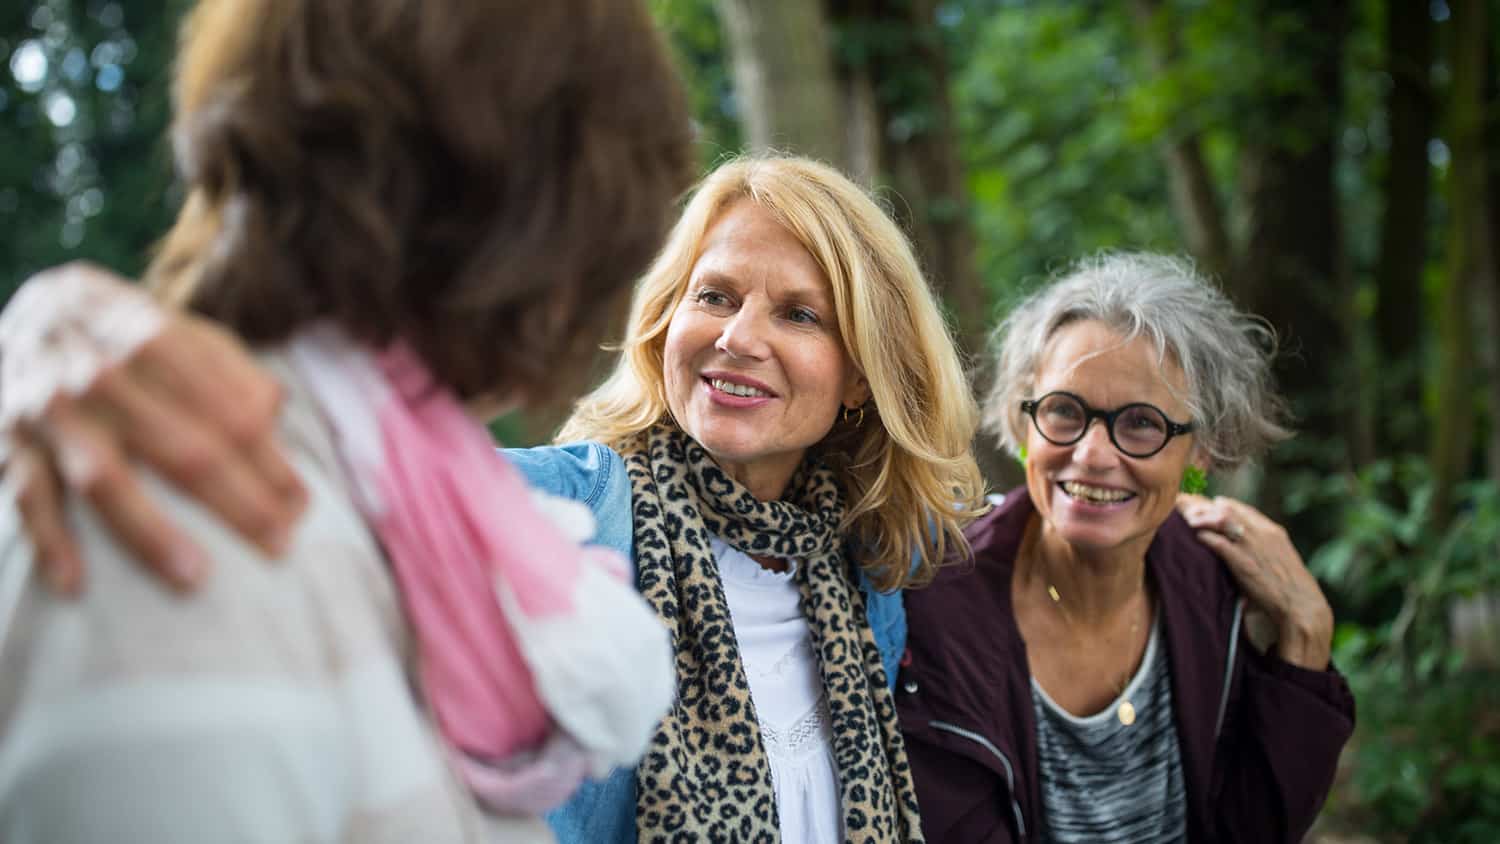 https://cdn.sixtyandme.com/wp-content/uploads/2018/10/Sixty-and-Me_26-Surprising-Habits-of-Happy-Older-Women-18-Might-Catch-You-Unprepared.jpg